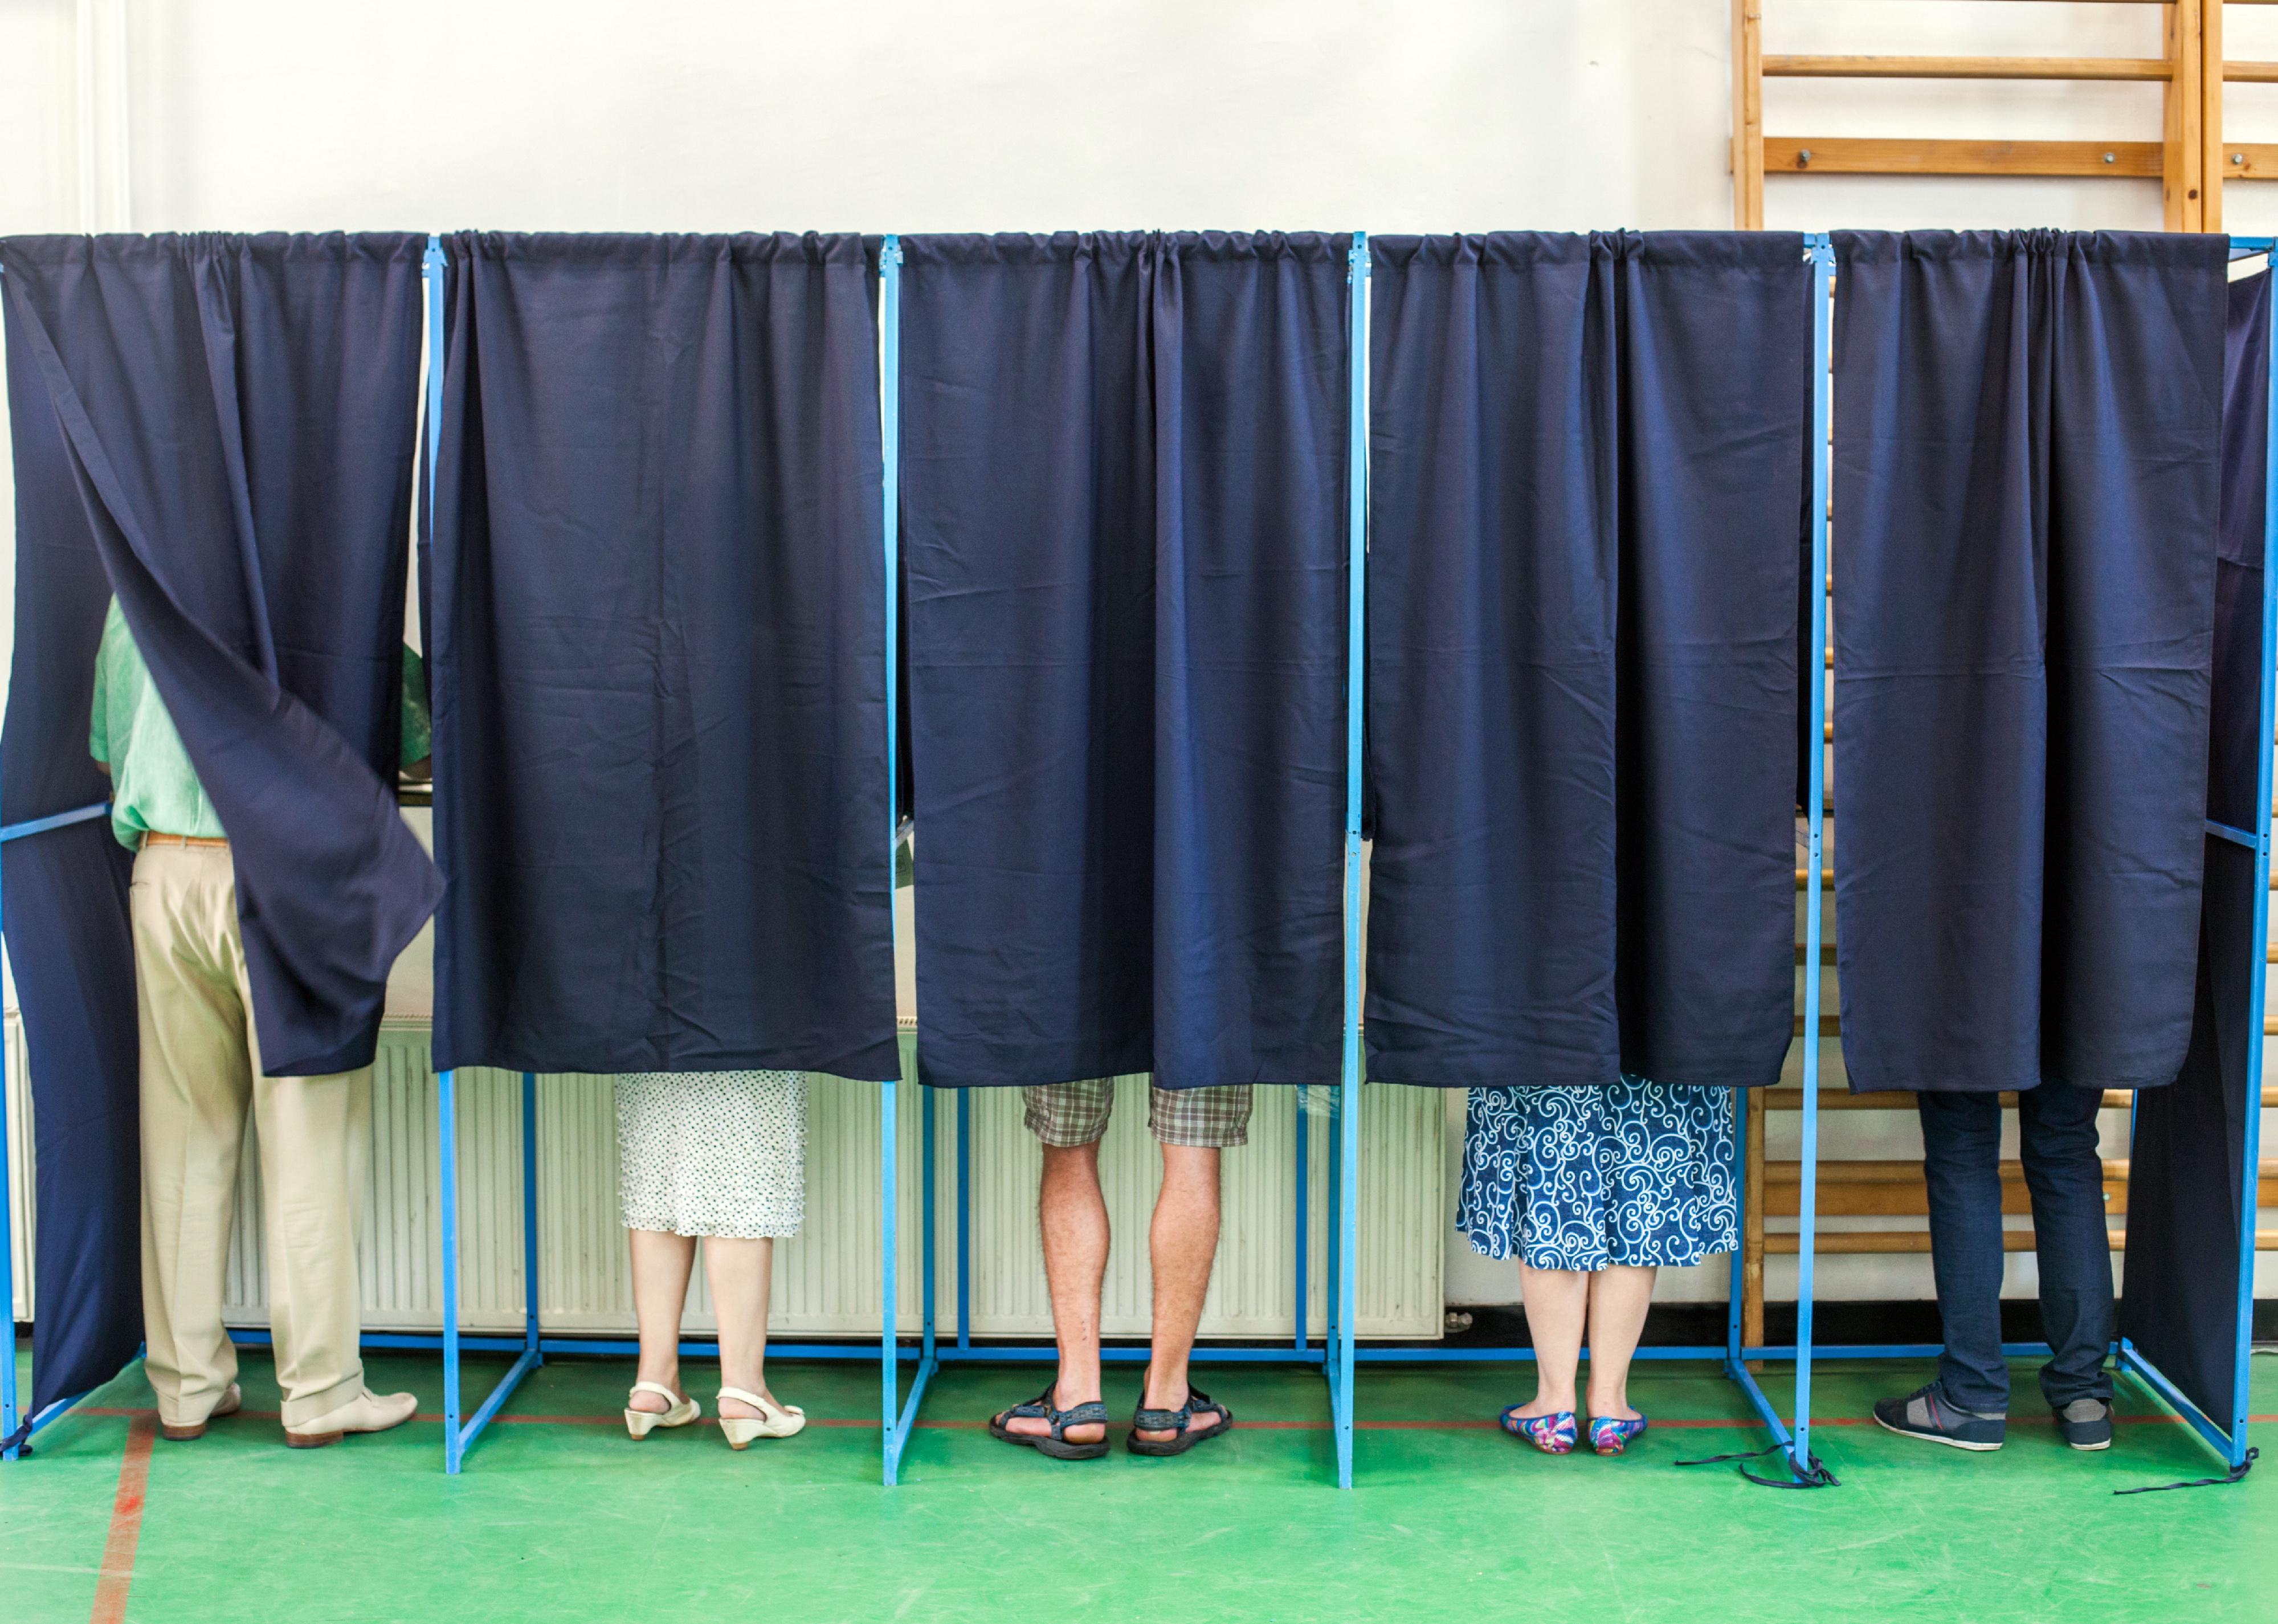 People voting in polling booths at a voting station